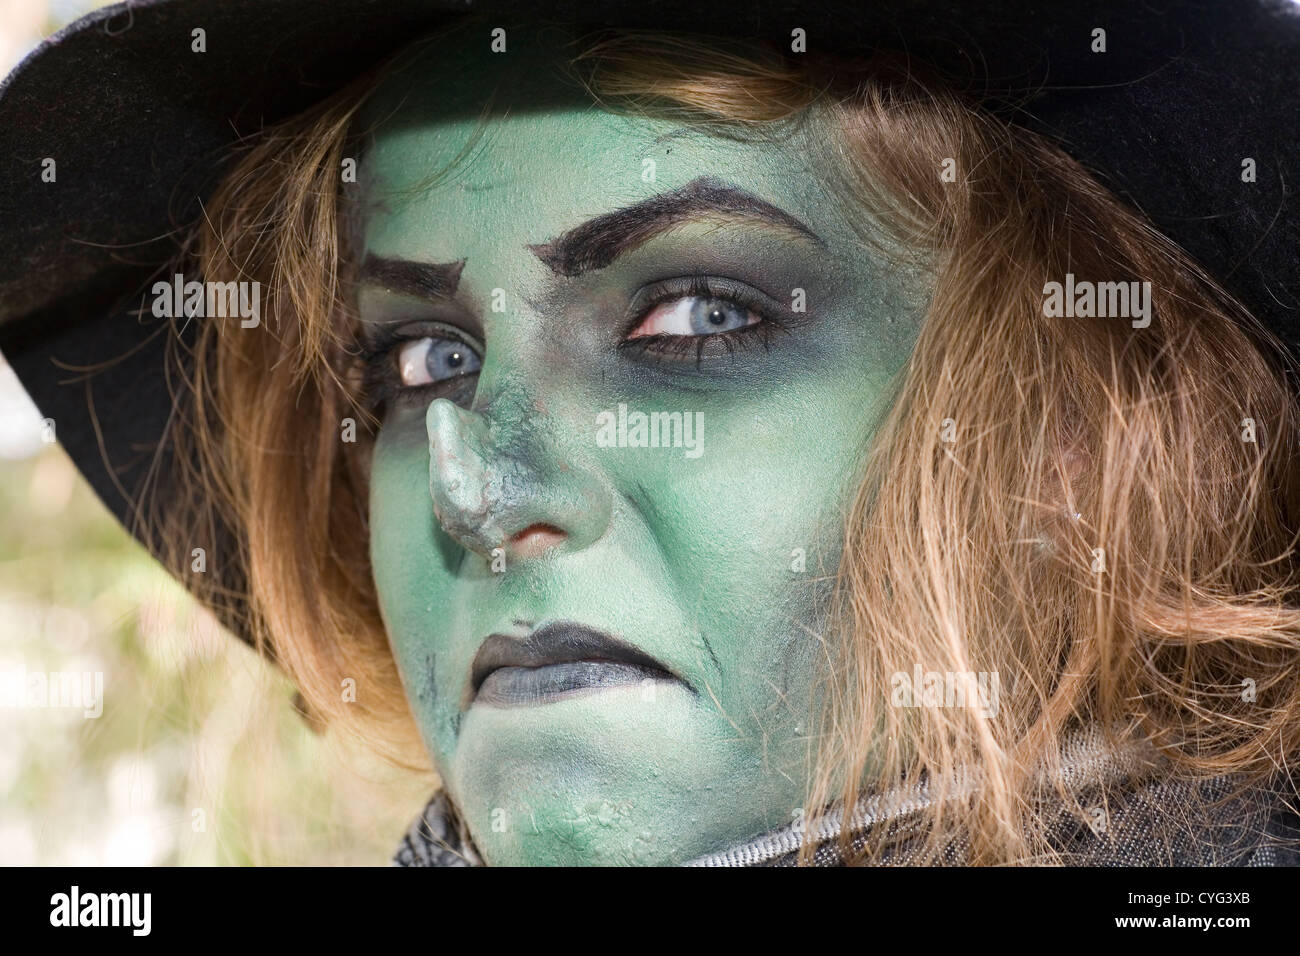 Girl dressed up with make up and prosthetic nose to look like a wicked green witch. Stock Photo